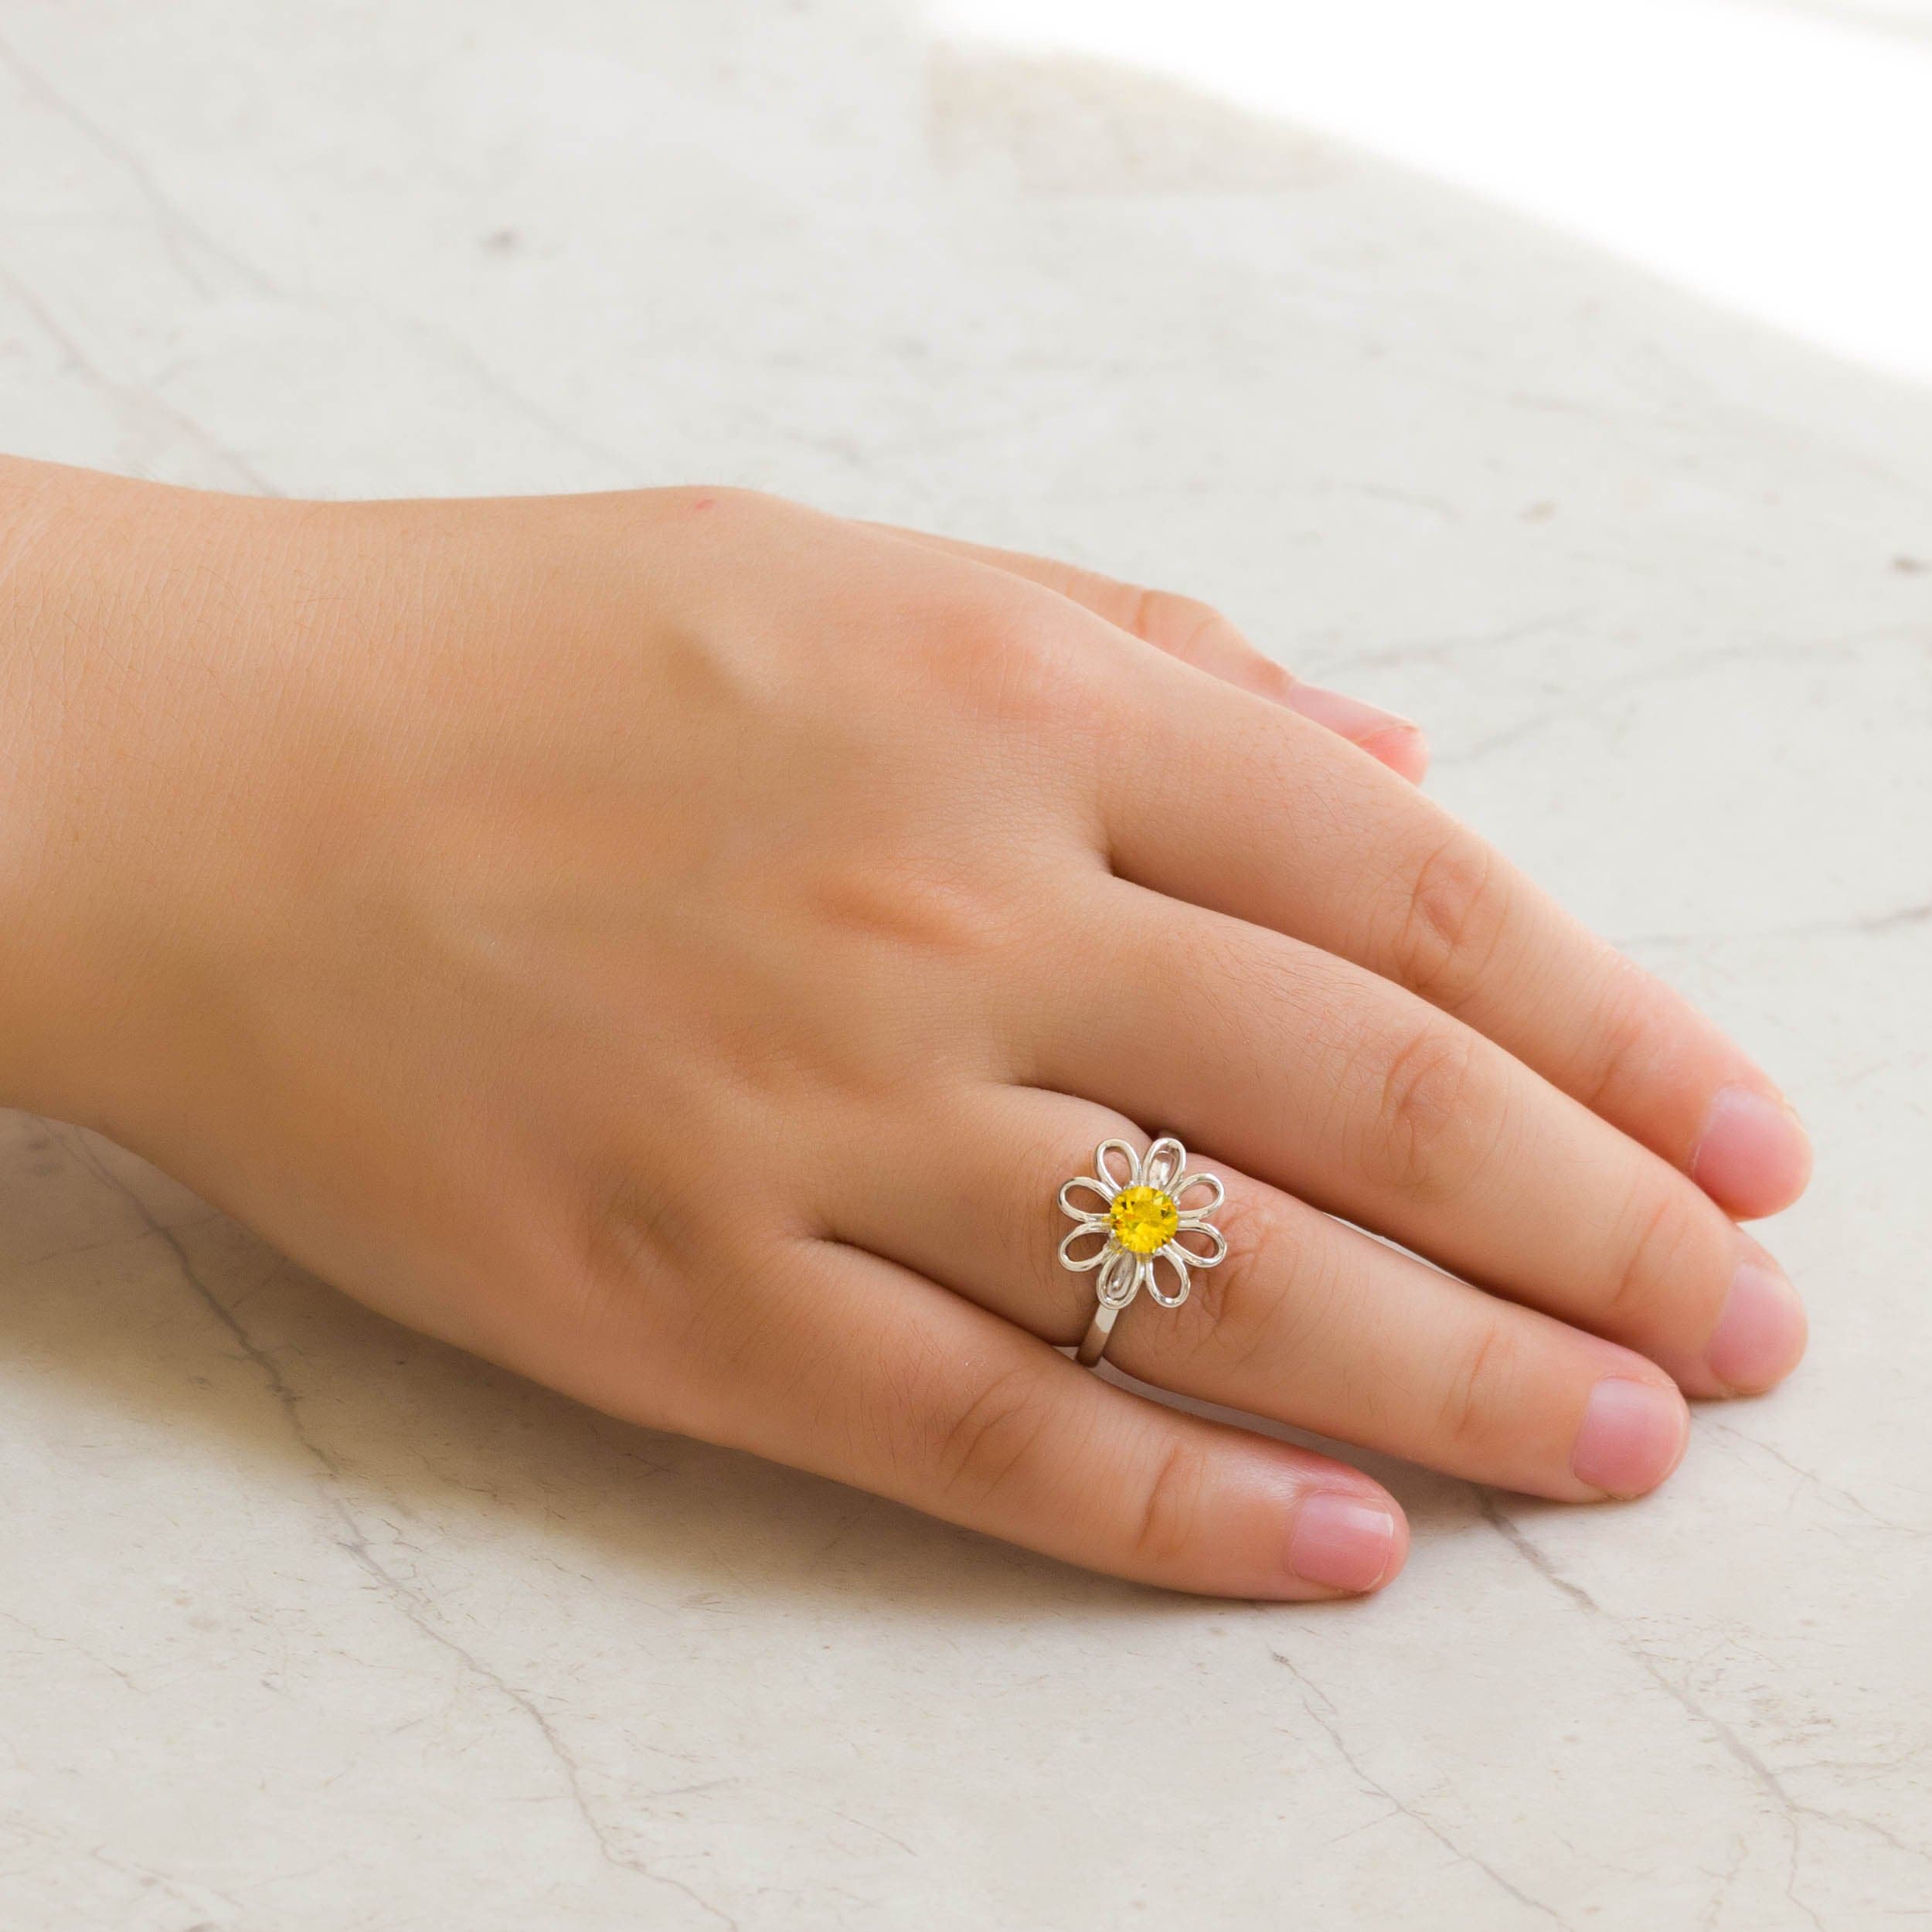 Adjustable Crystal Daisy Ring Created with Zircondia® Crystals